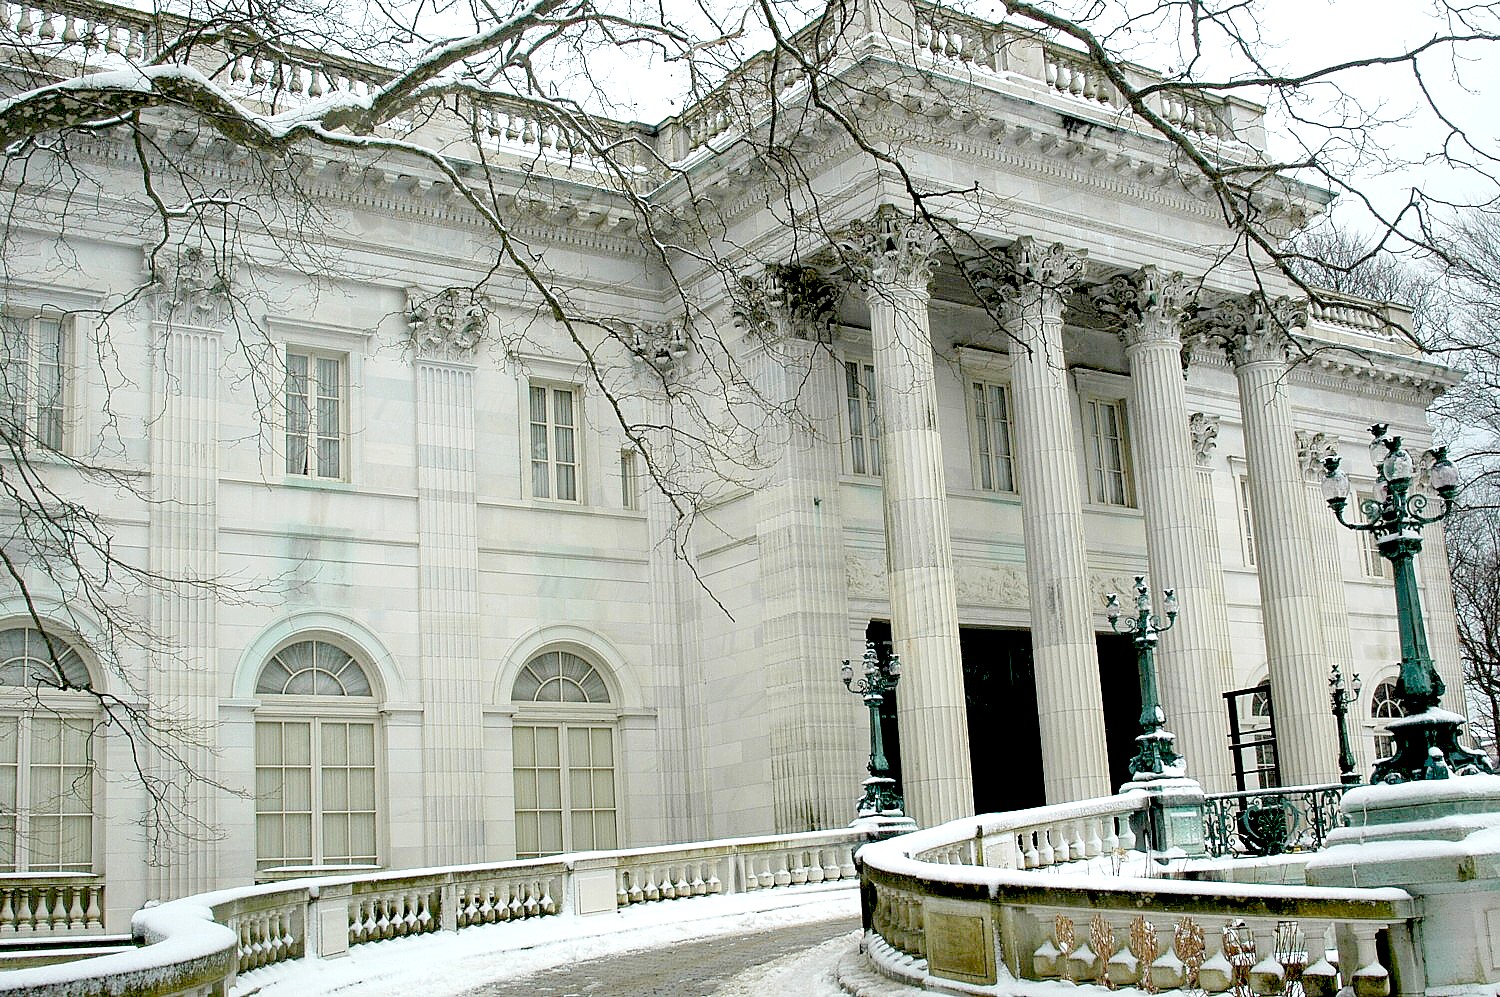 Marble House, a grand stage for Alva Vanderbilt's climb to social and political power, first as a leading society hostess and later as a leader of the "Votes for Women" campaign, is one of the special venues for Newport Christmas © 2016 Karen Rubin/goingplacesfarandnear.com